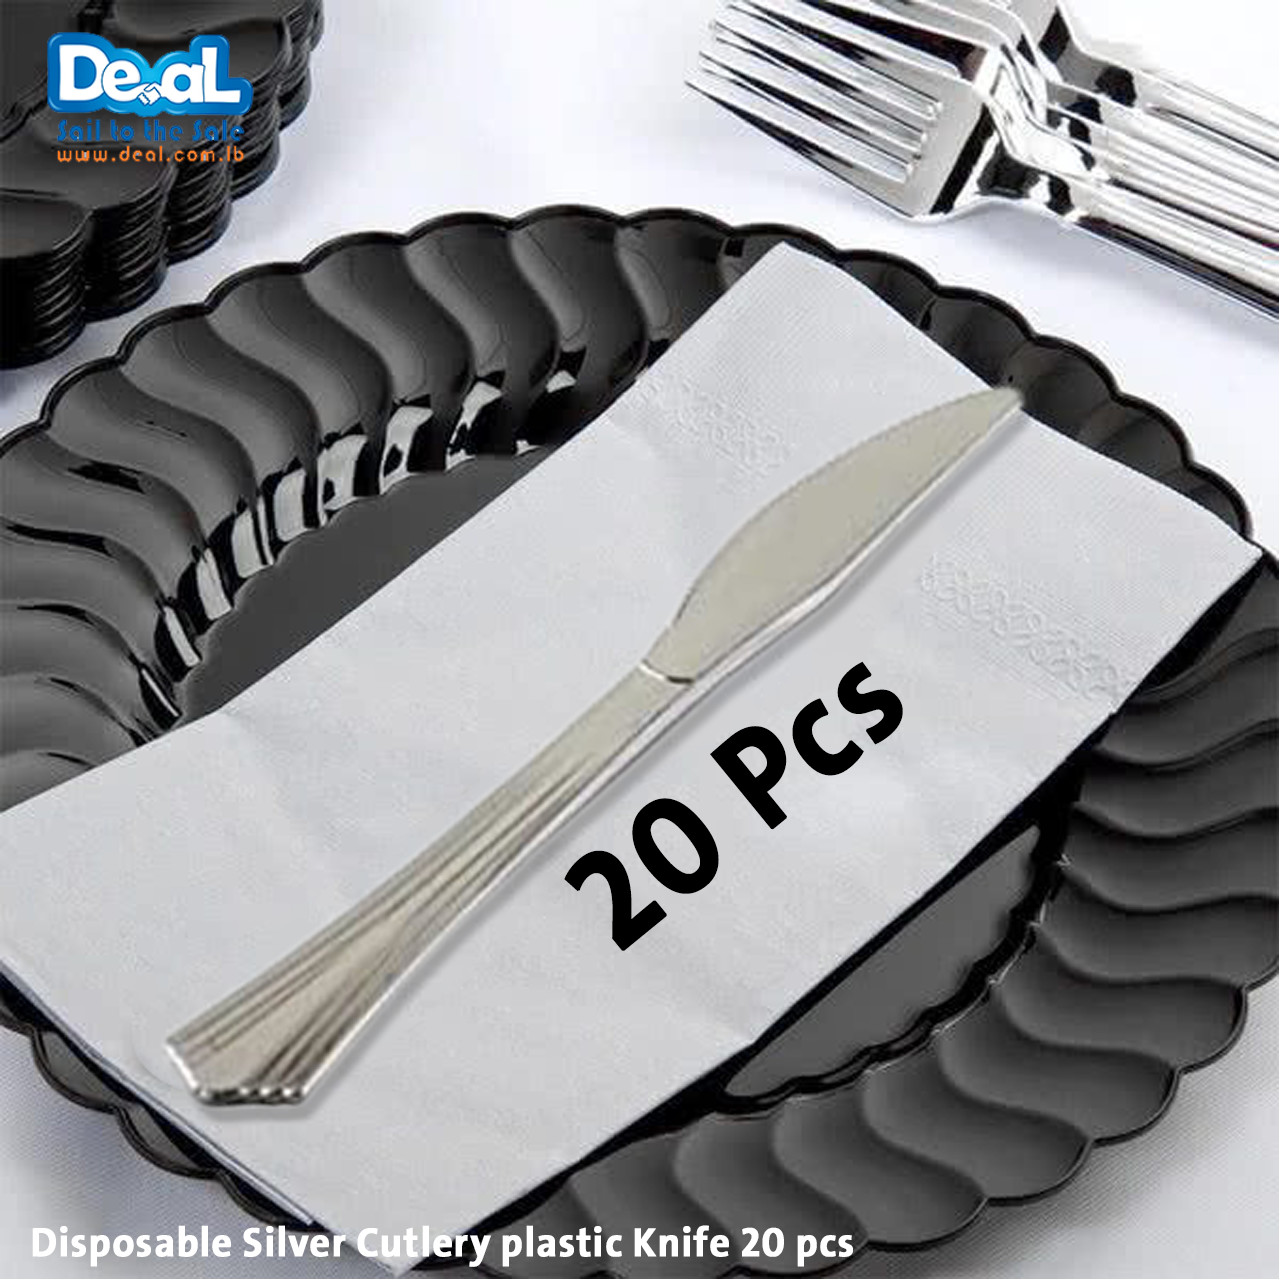 Disposable+Silver+Cutlery++plastic+Knife+20+pcs